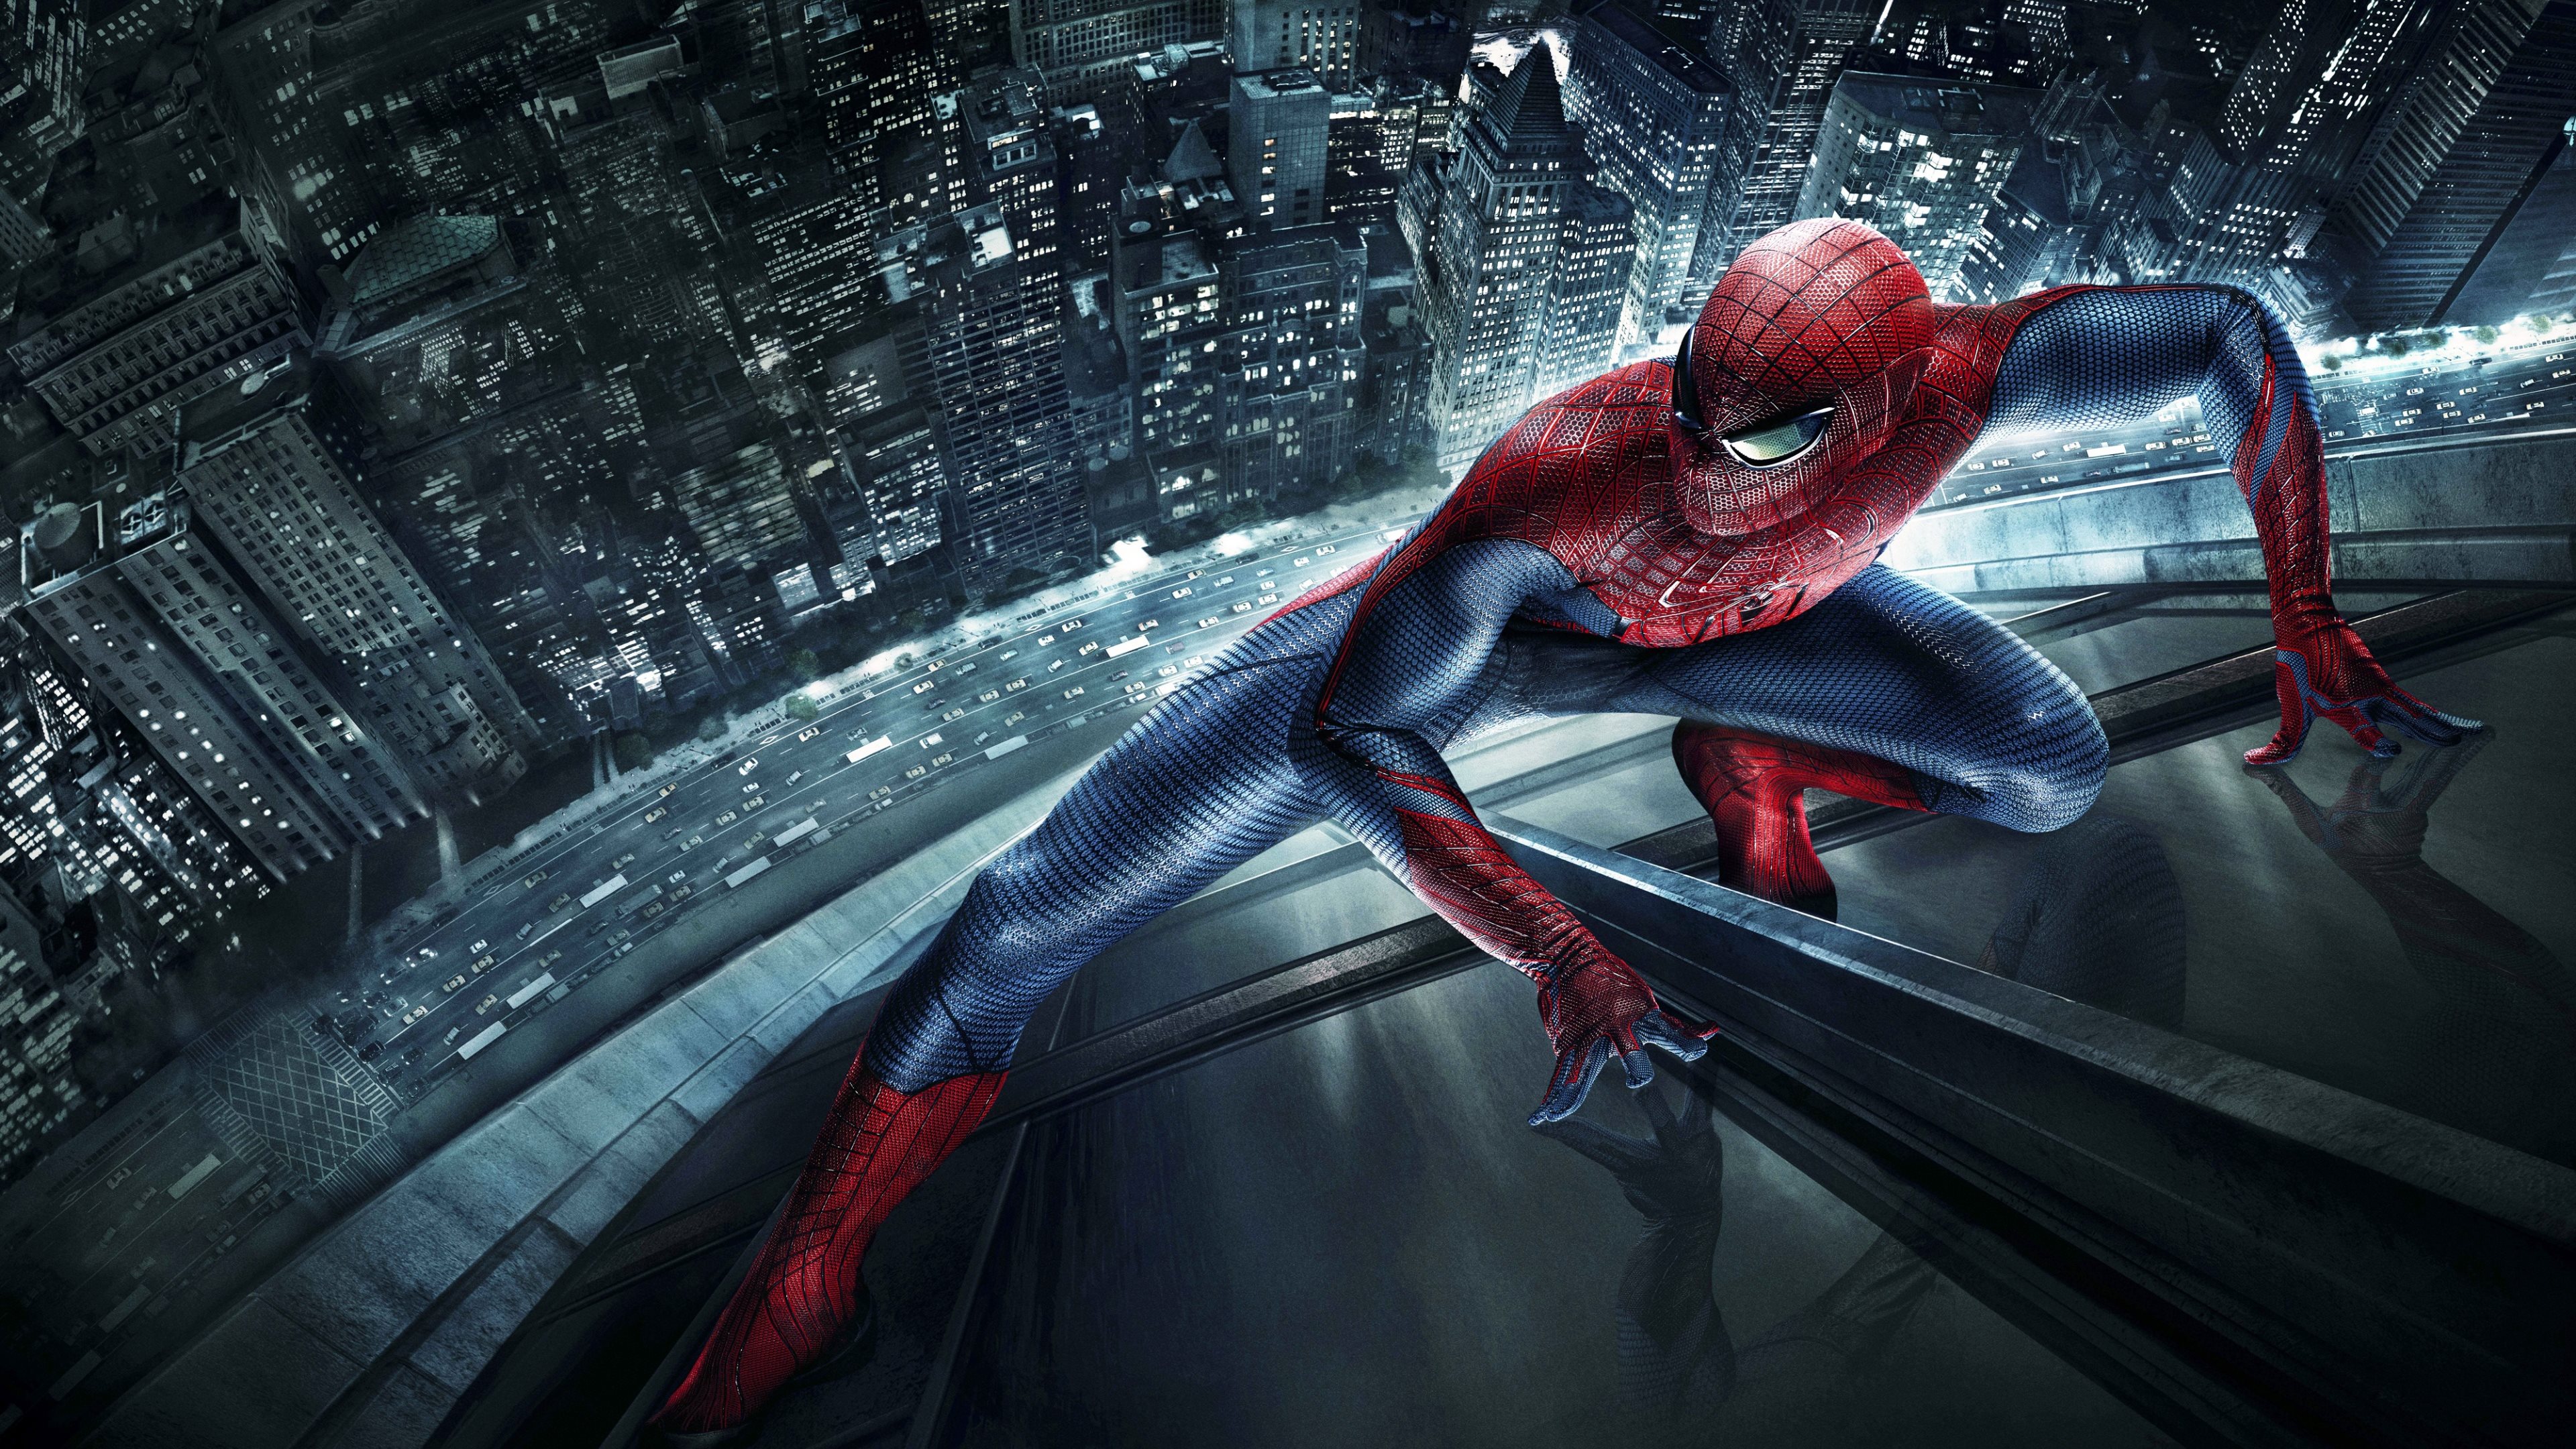 The Amazing Spider Man 2 HD Wallpapers. 4K Backgrounds